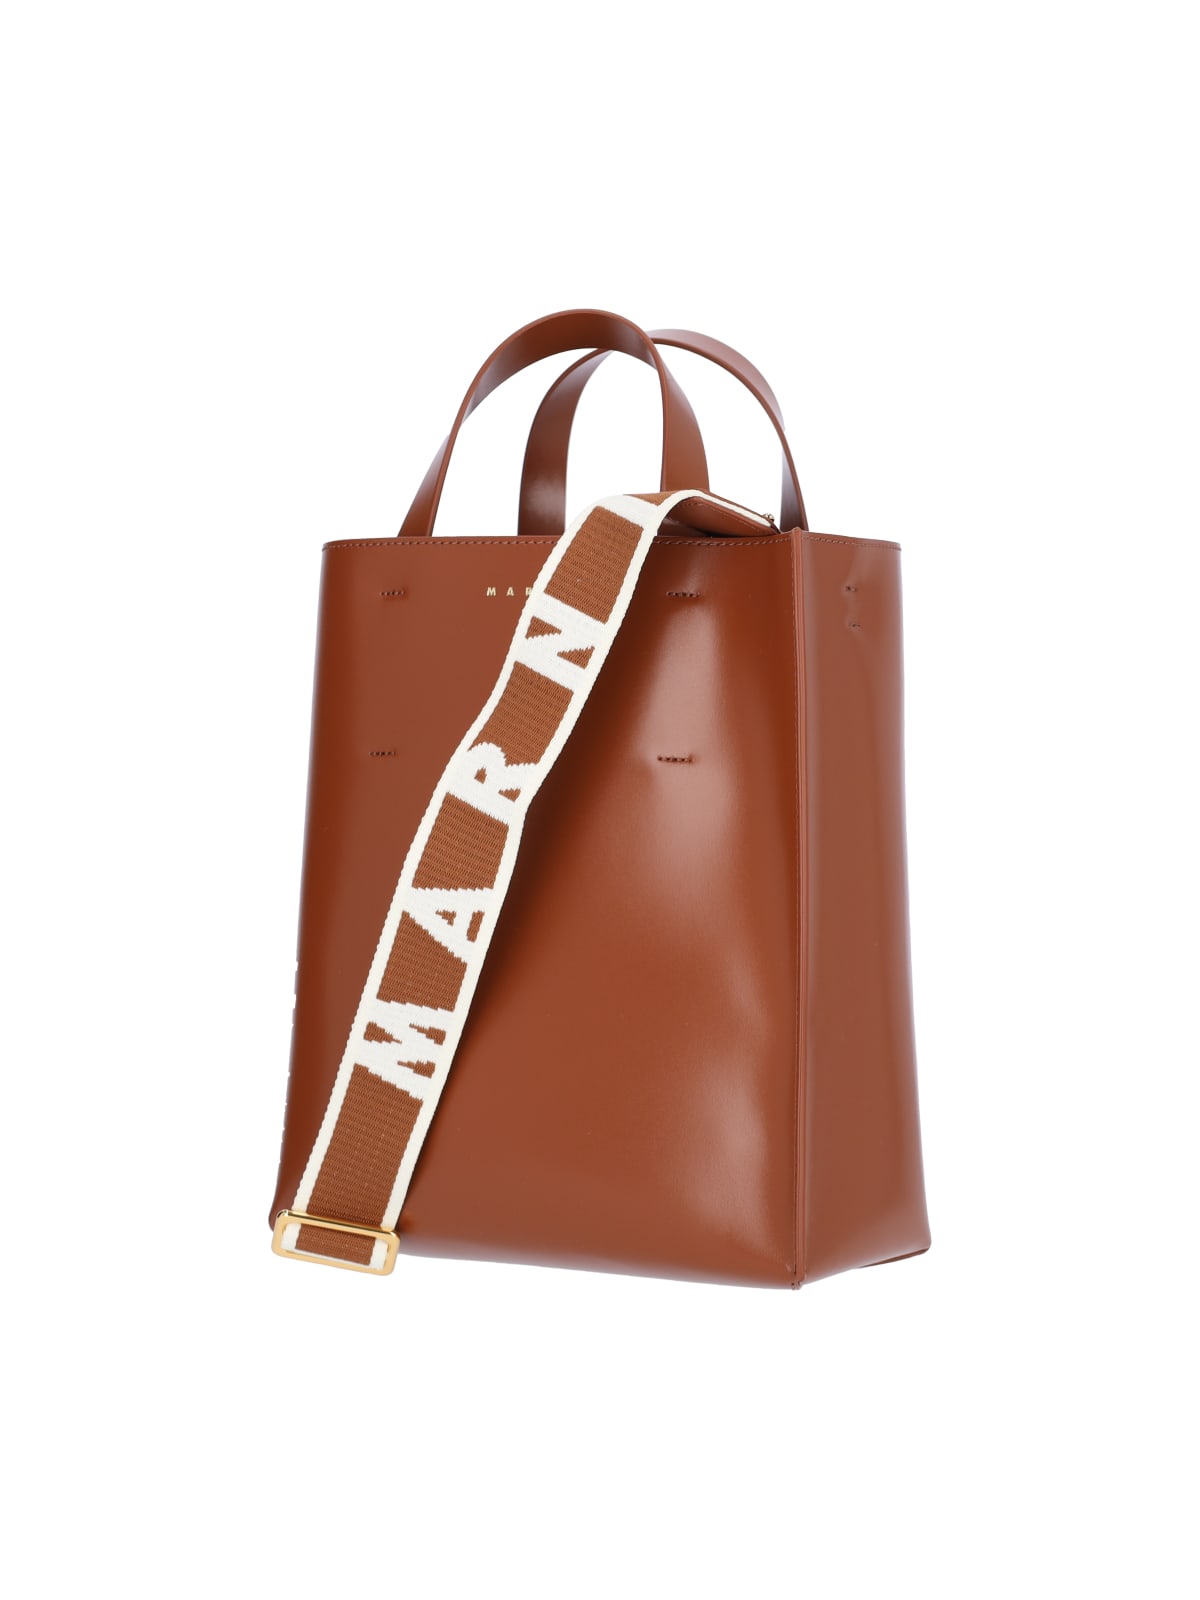 Shop Marni Small Tote Bag Museo In Leather